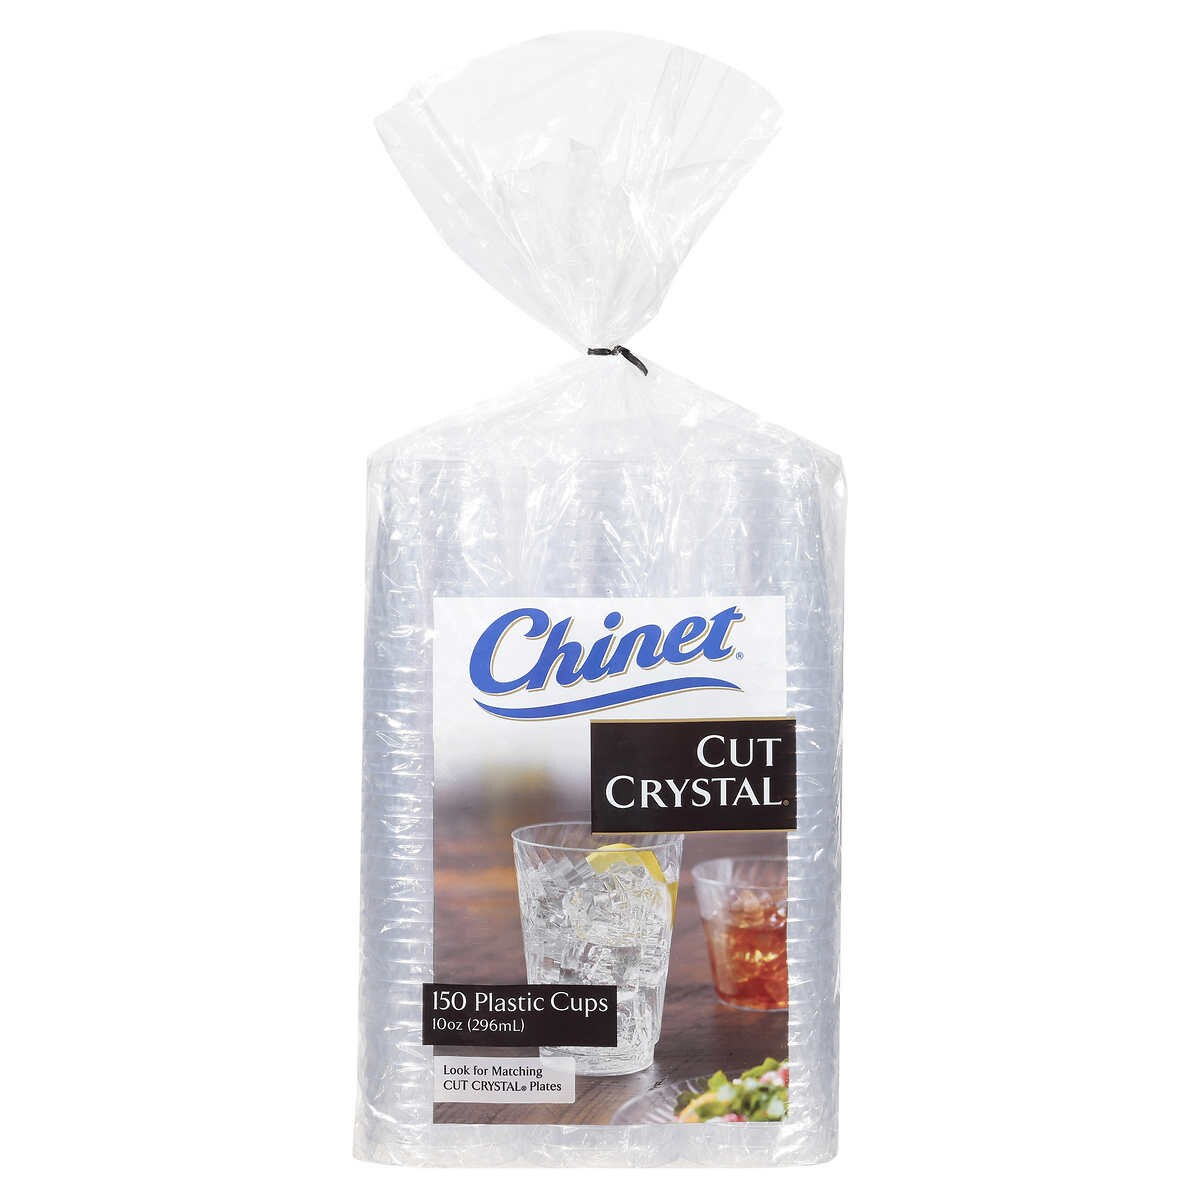 Chinet   Cut Crystal Plastic Cup Clear 10 oz 150-count